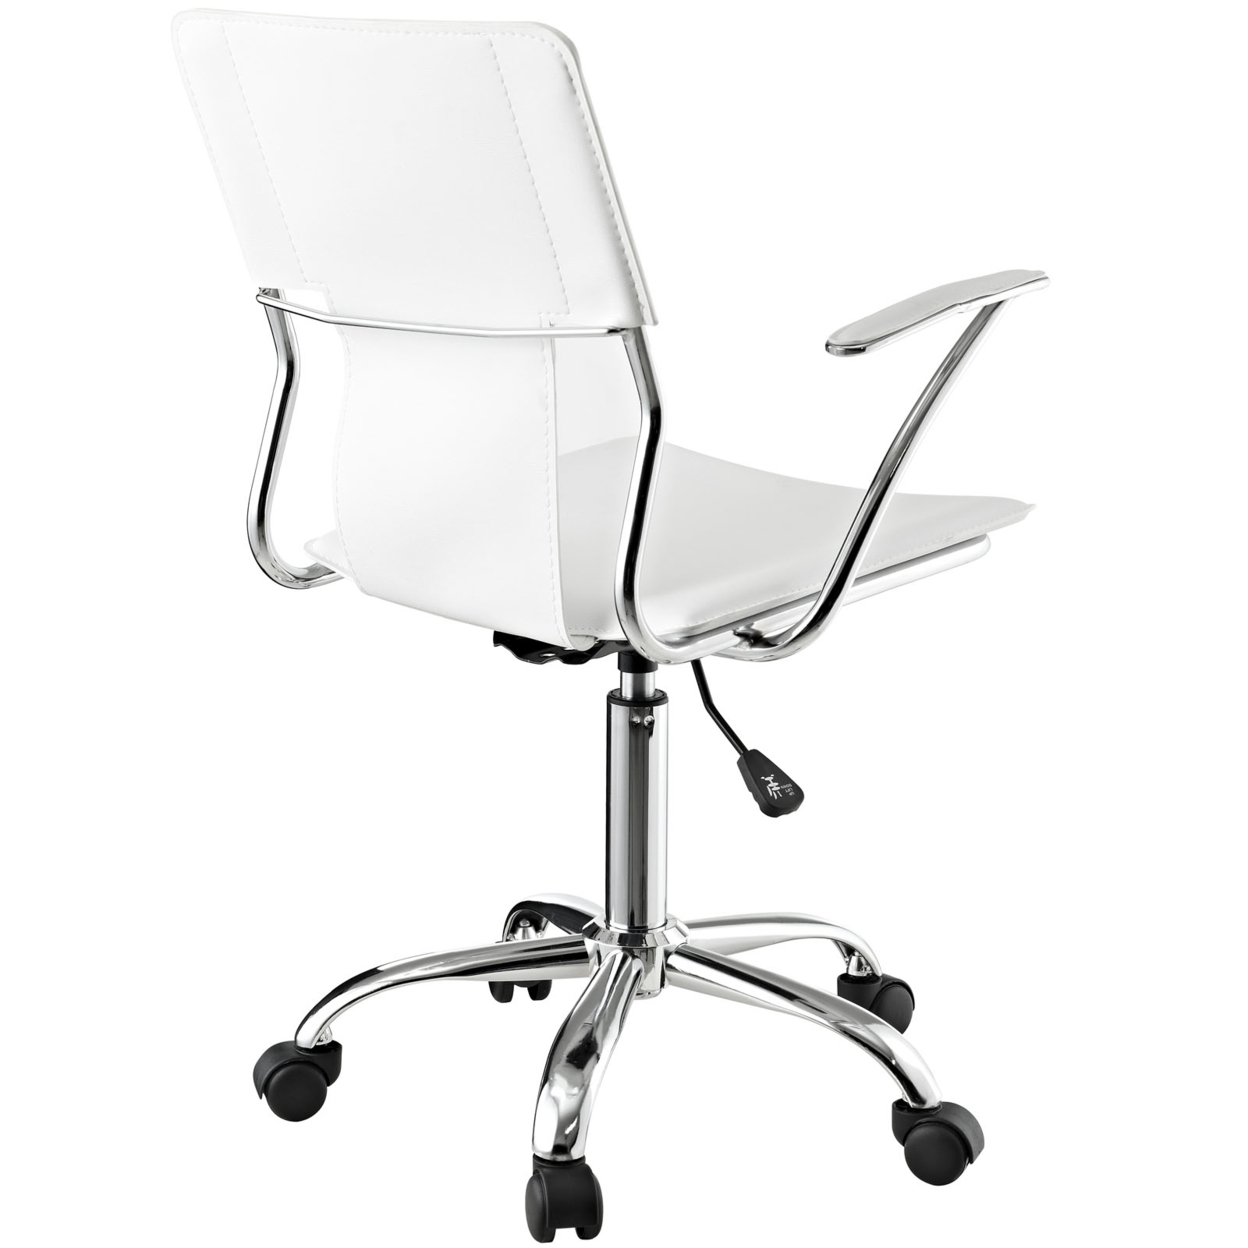 White Studio Office Chair - image 5 of 5